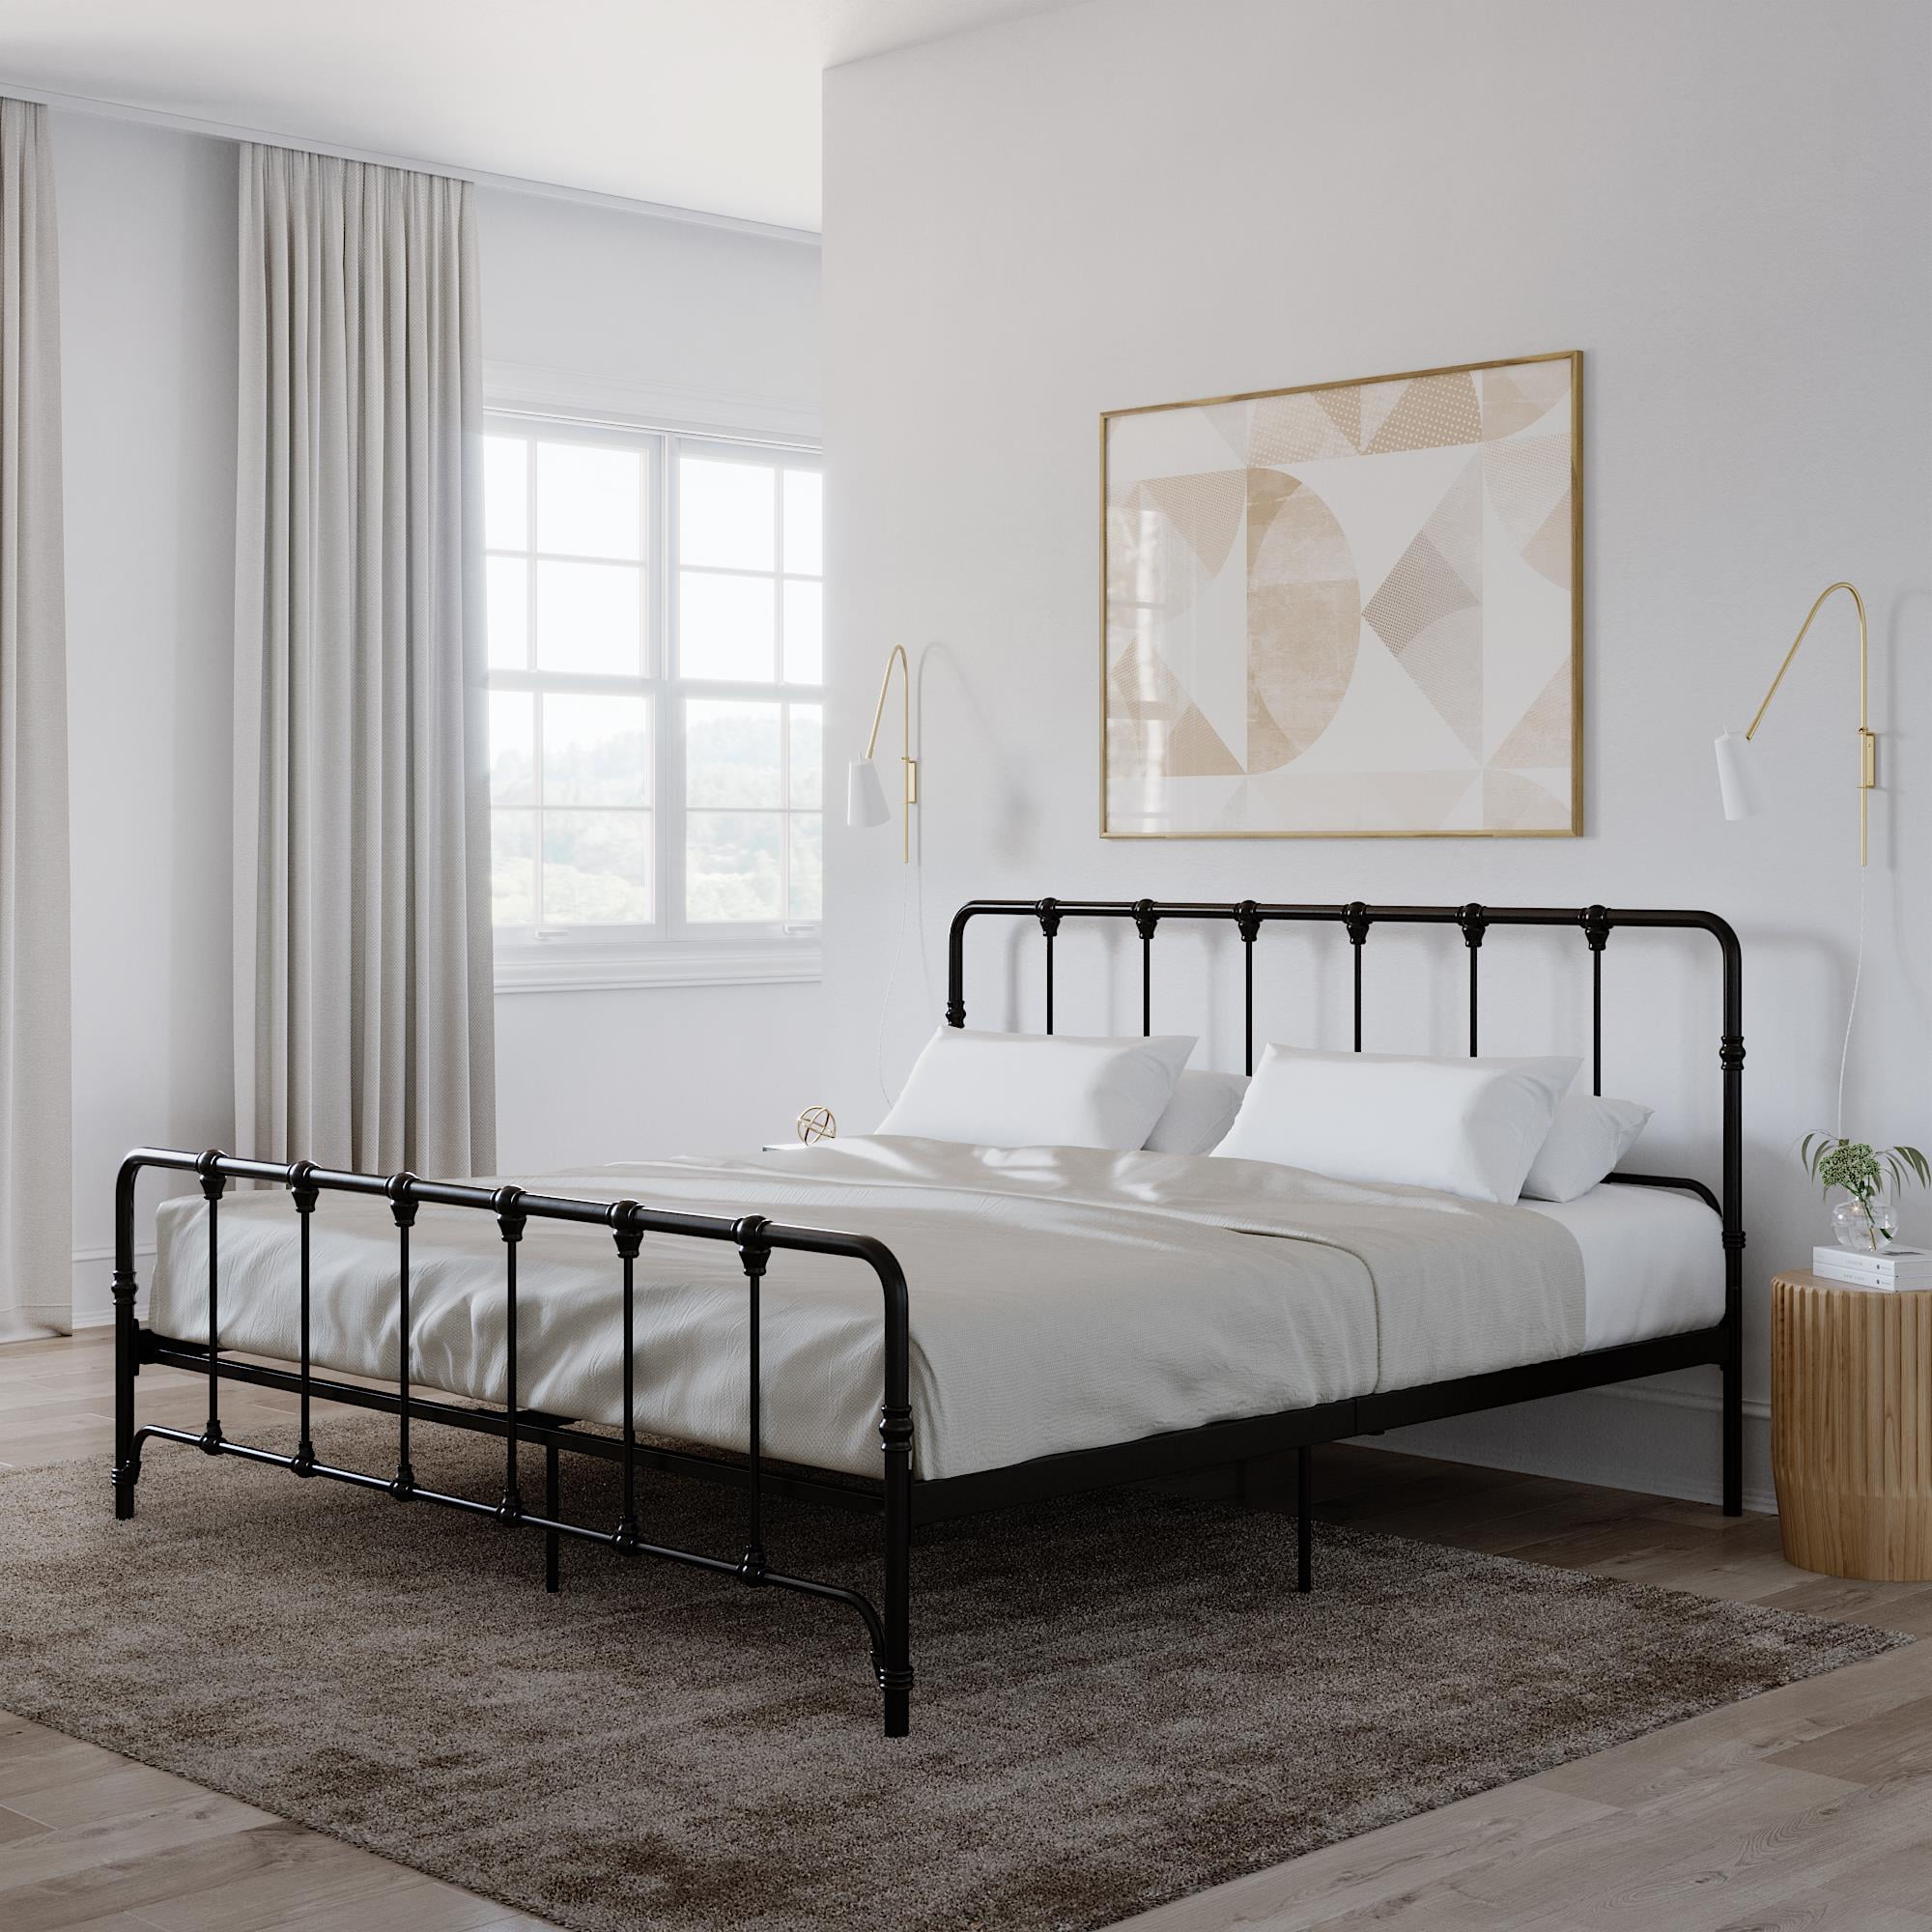 Mainstays Farmhouse Metal Bed King, King Steel Bed Frame